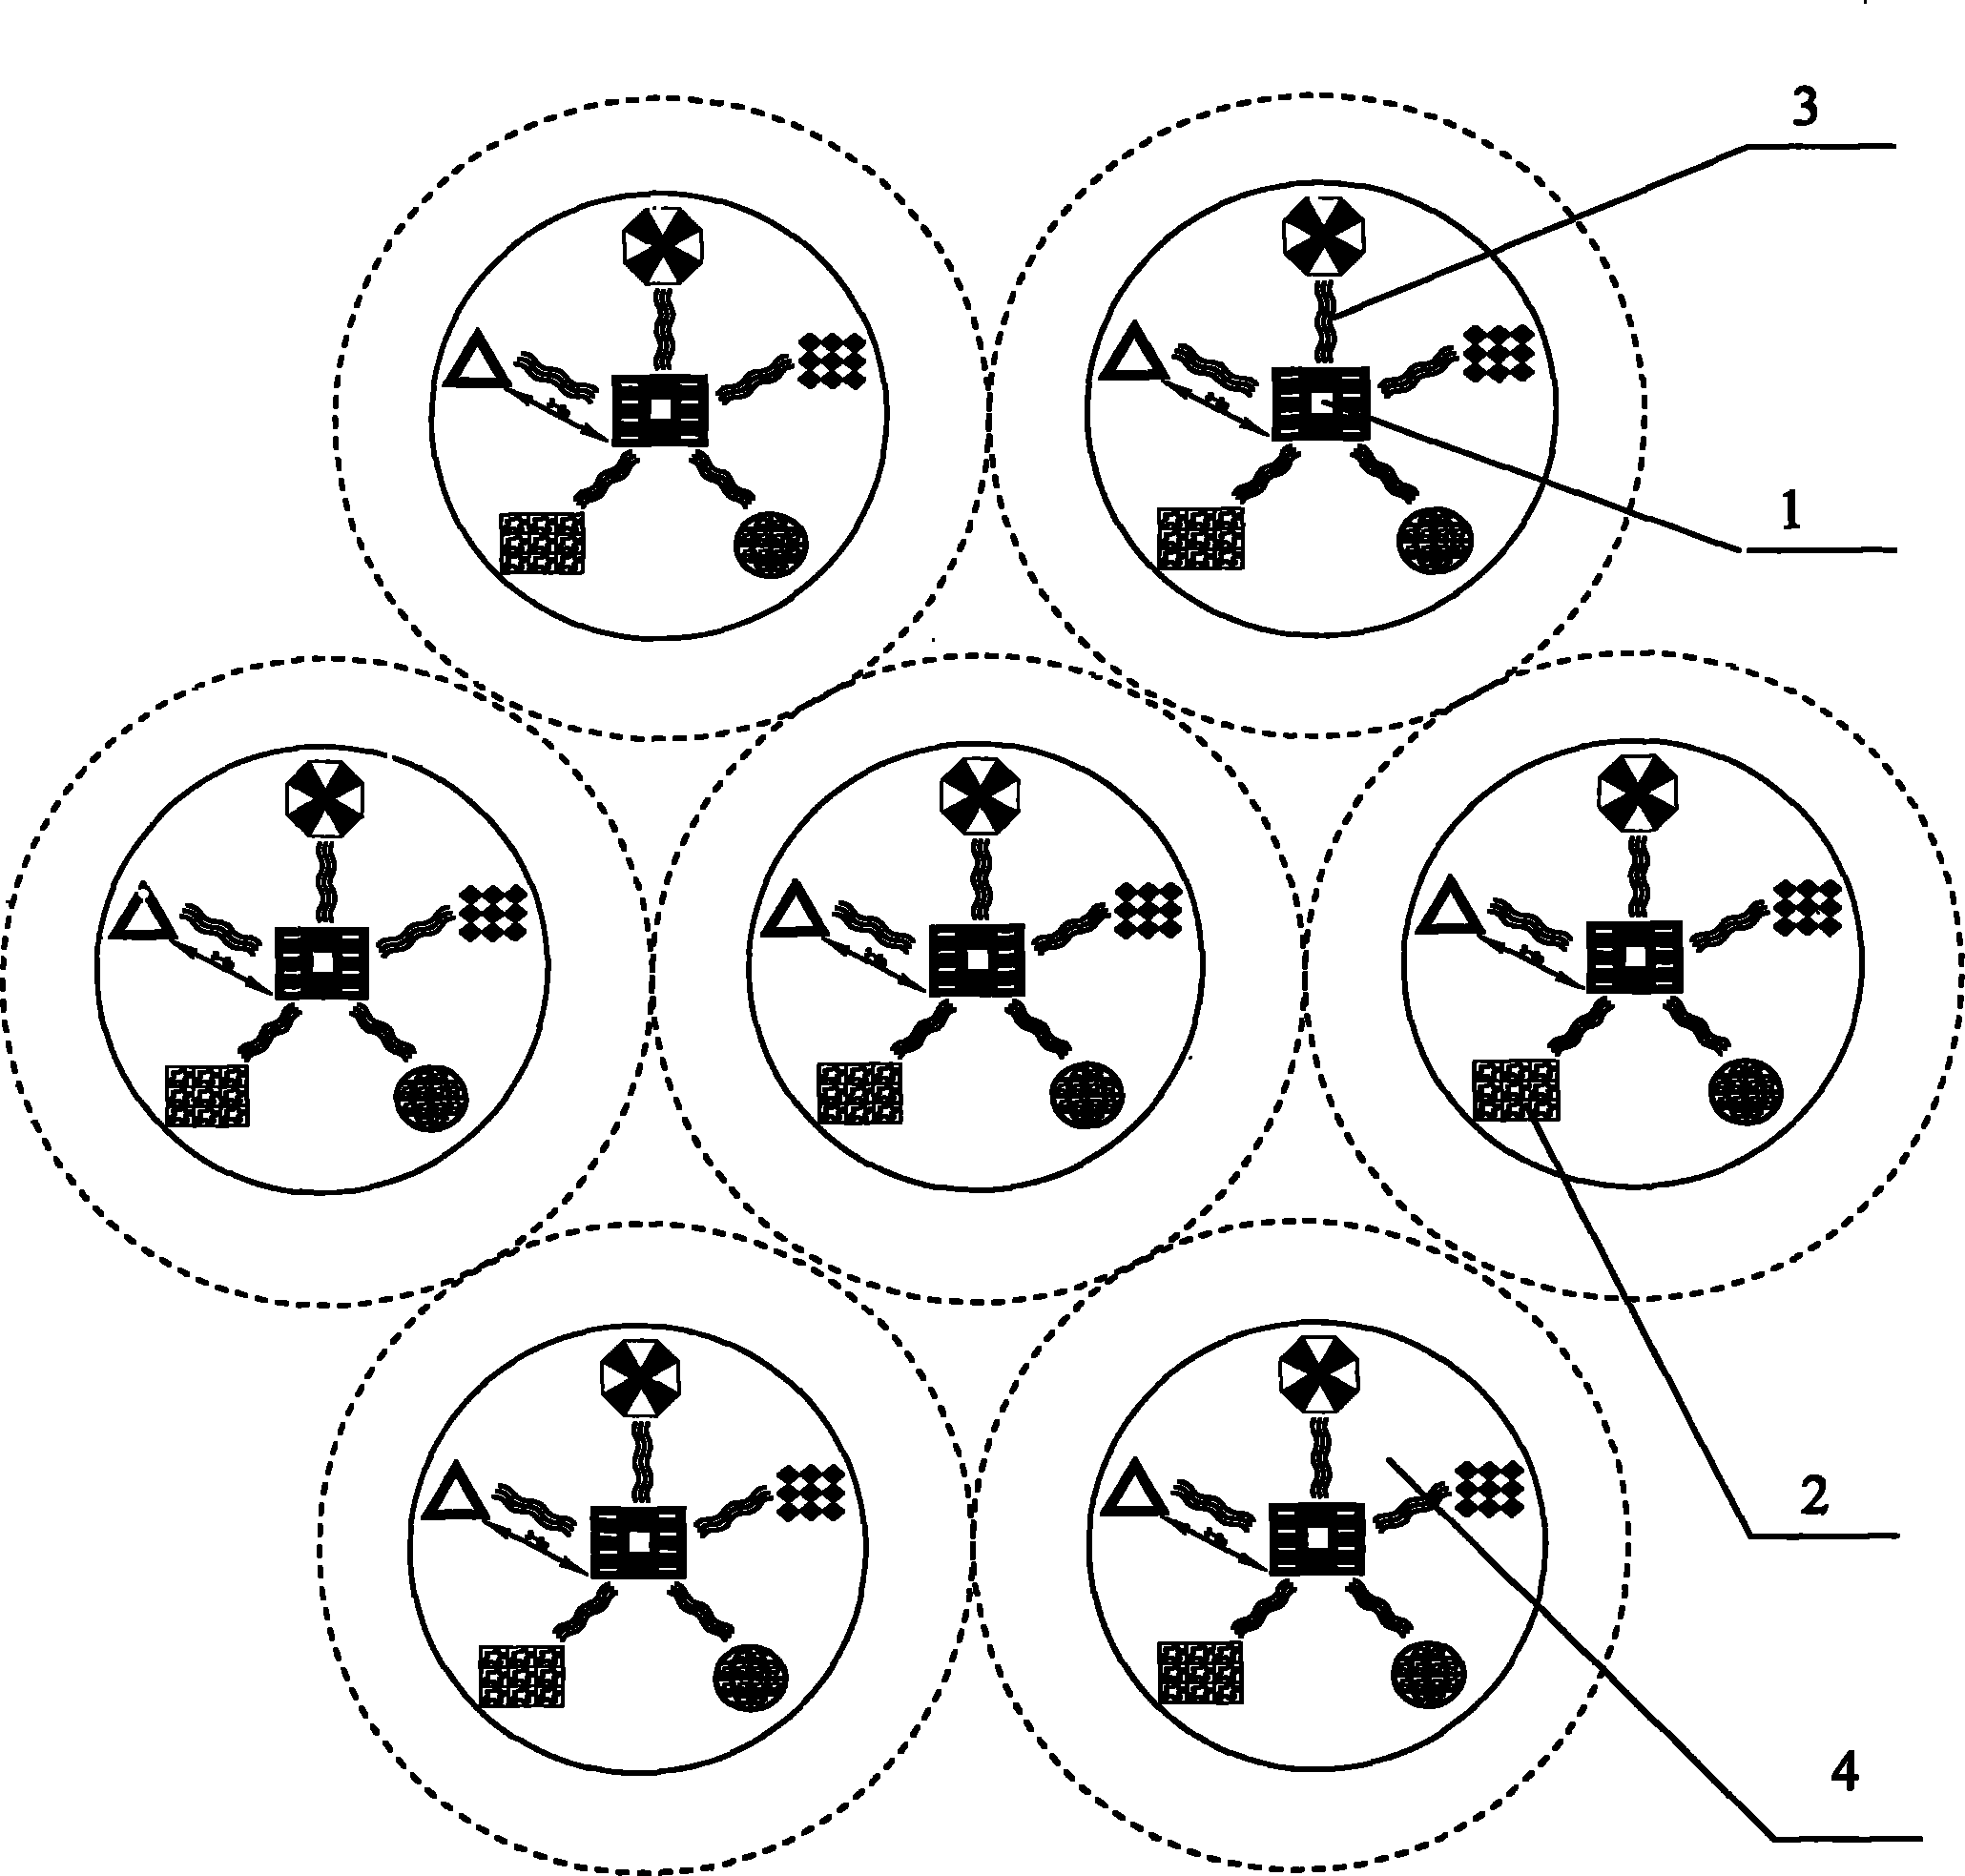 Star-like radial allocation method for artificial reefs